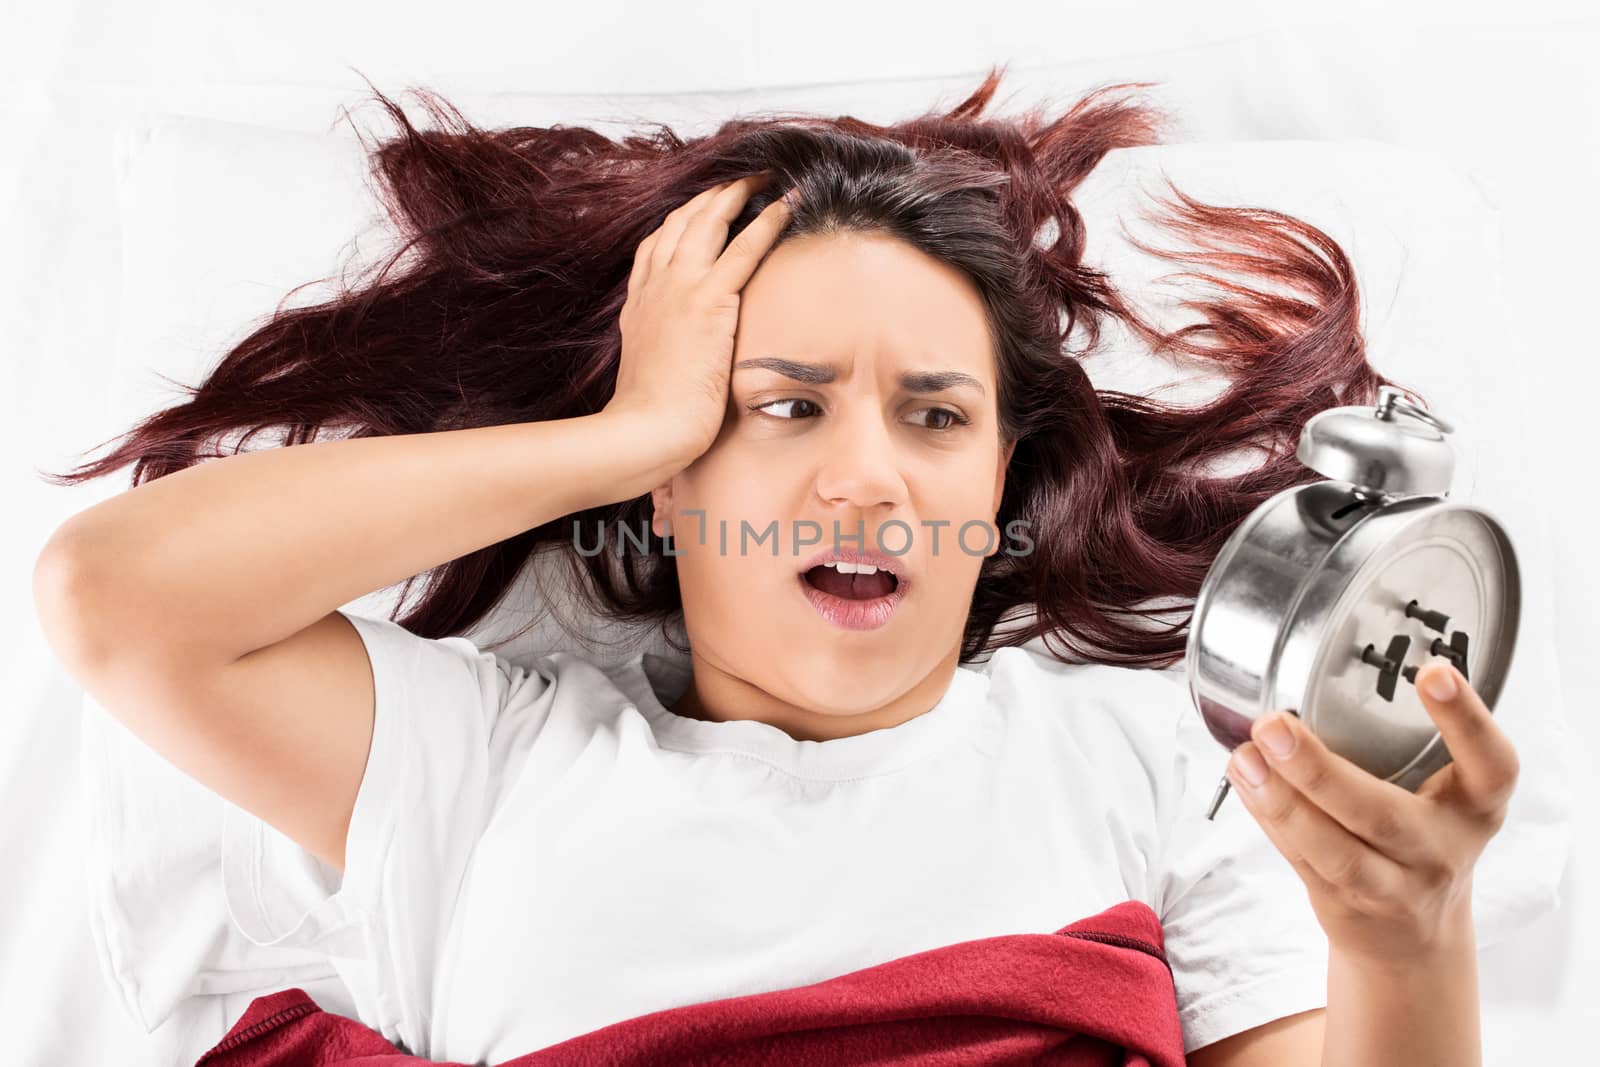 I overslept again! A girl lying in bed and holding her head looking at the alarm clock realizing that she is late, isolated on white background.